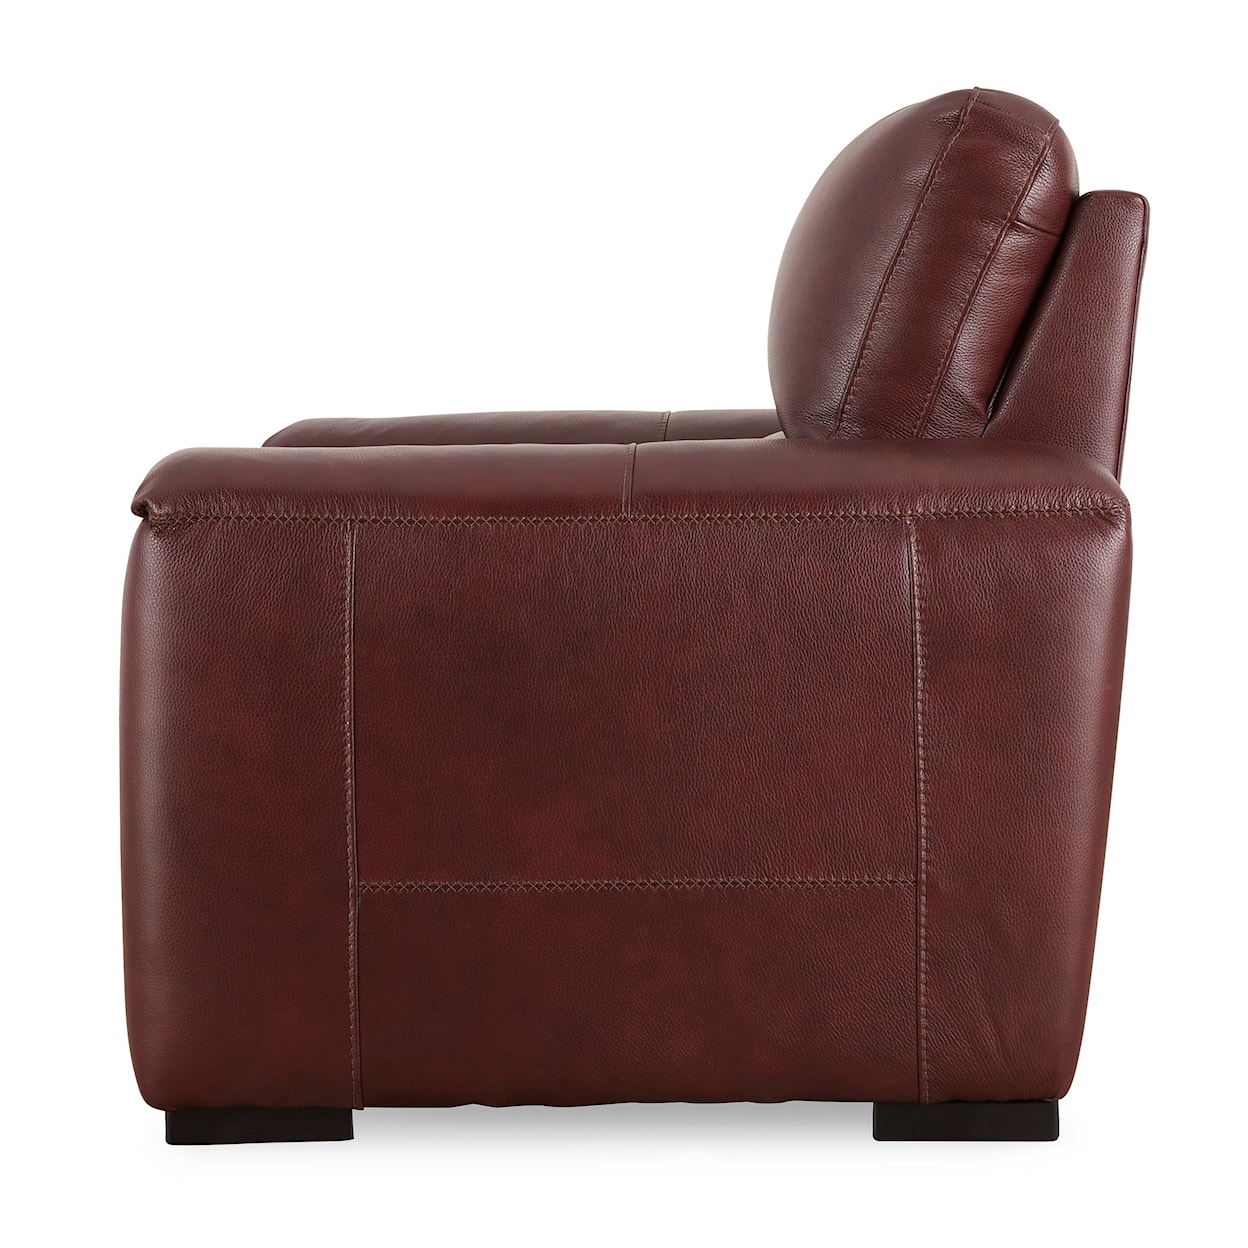 Signature Design by Ashley Alessandro Power Recliner